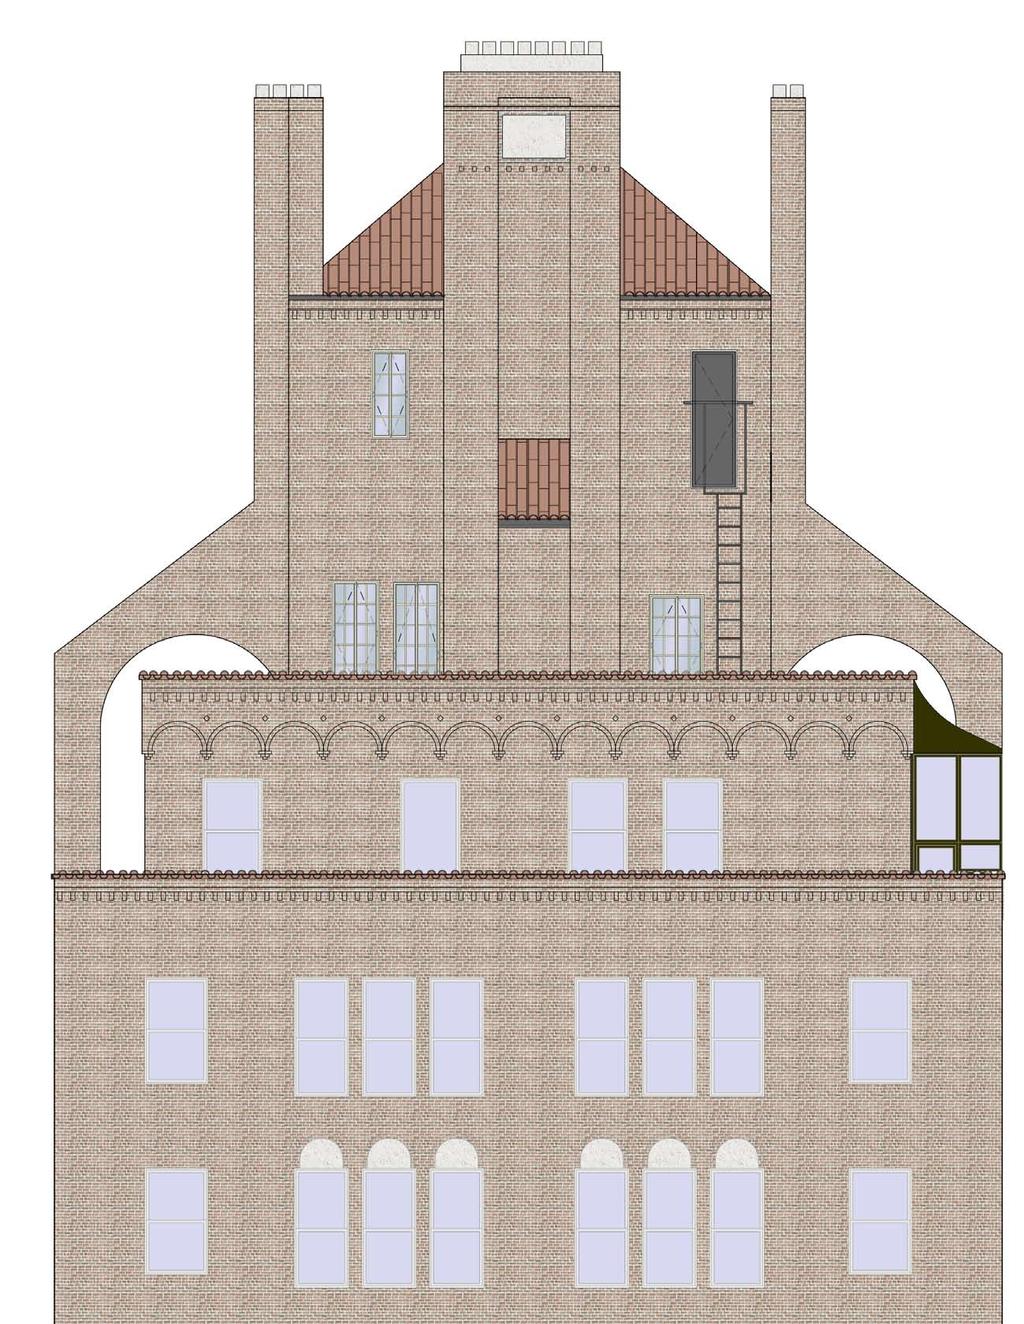 EXISTING EAST ELEVATION PROPOSED